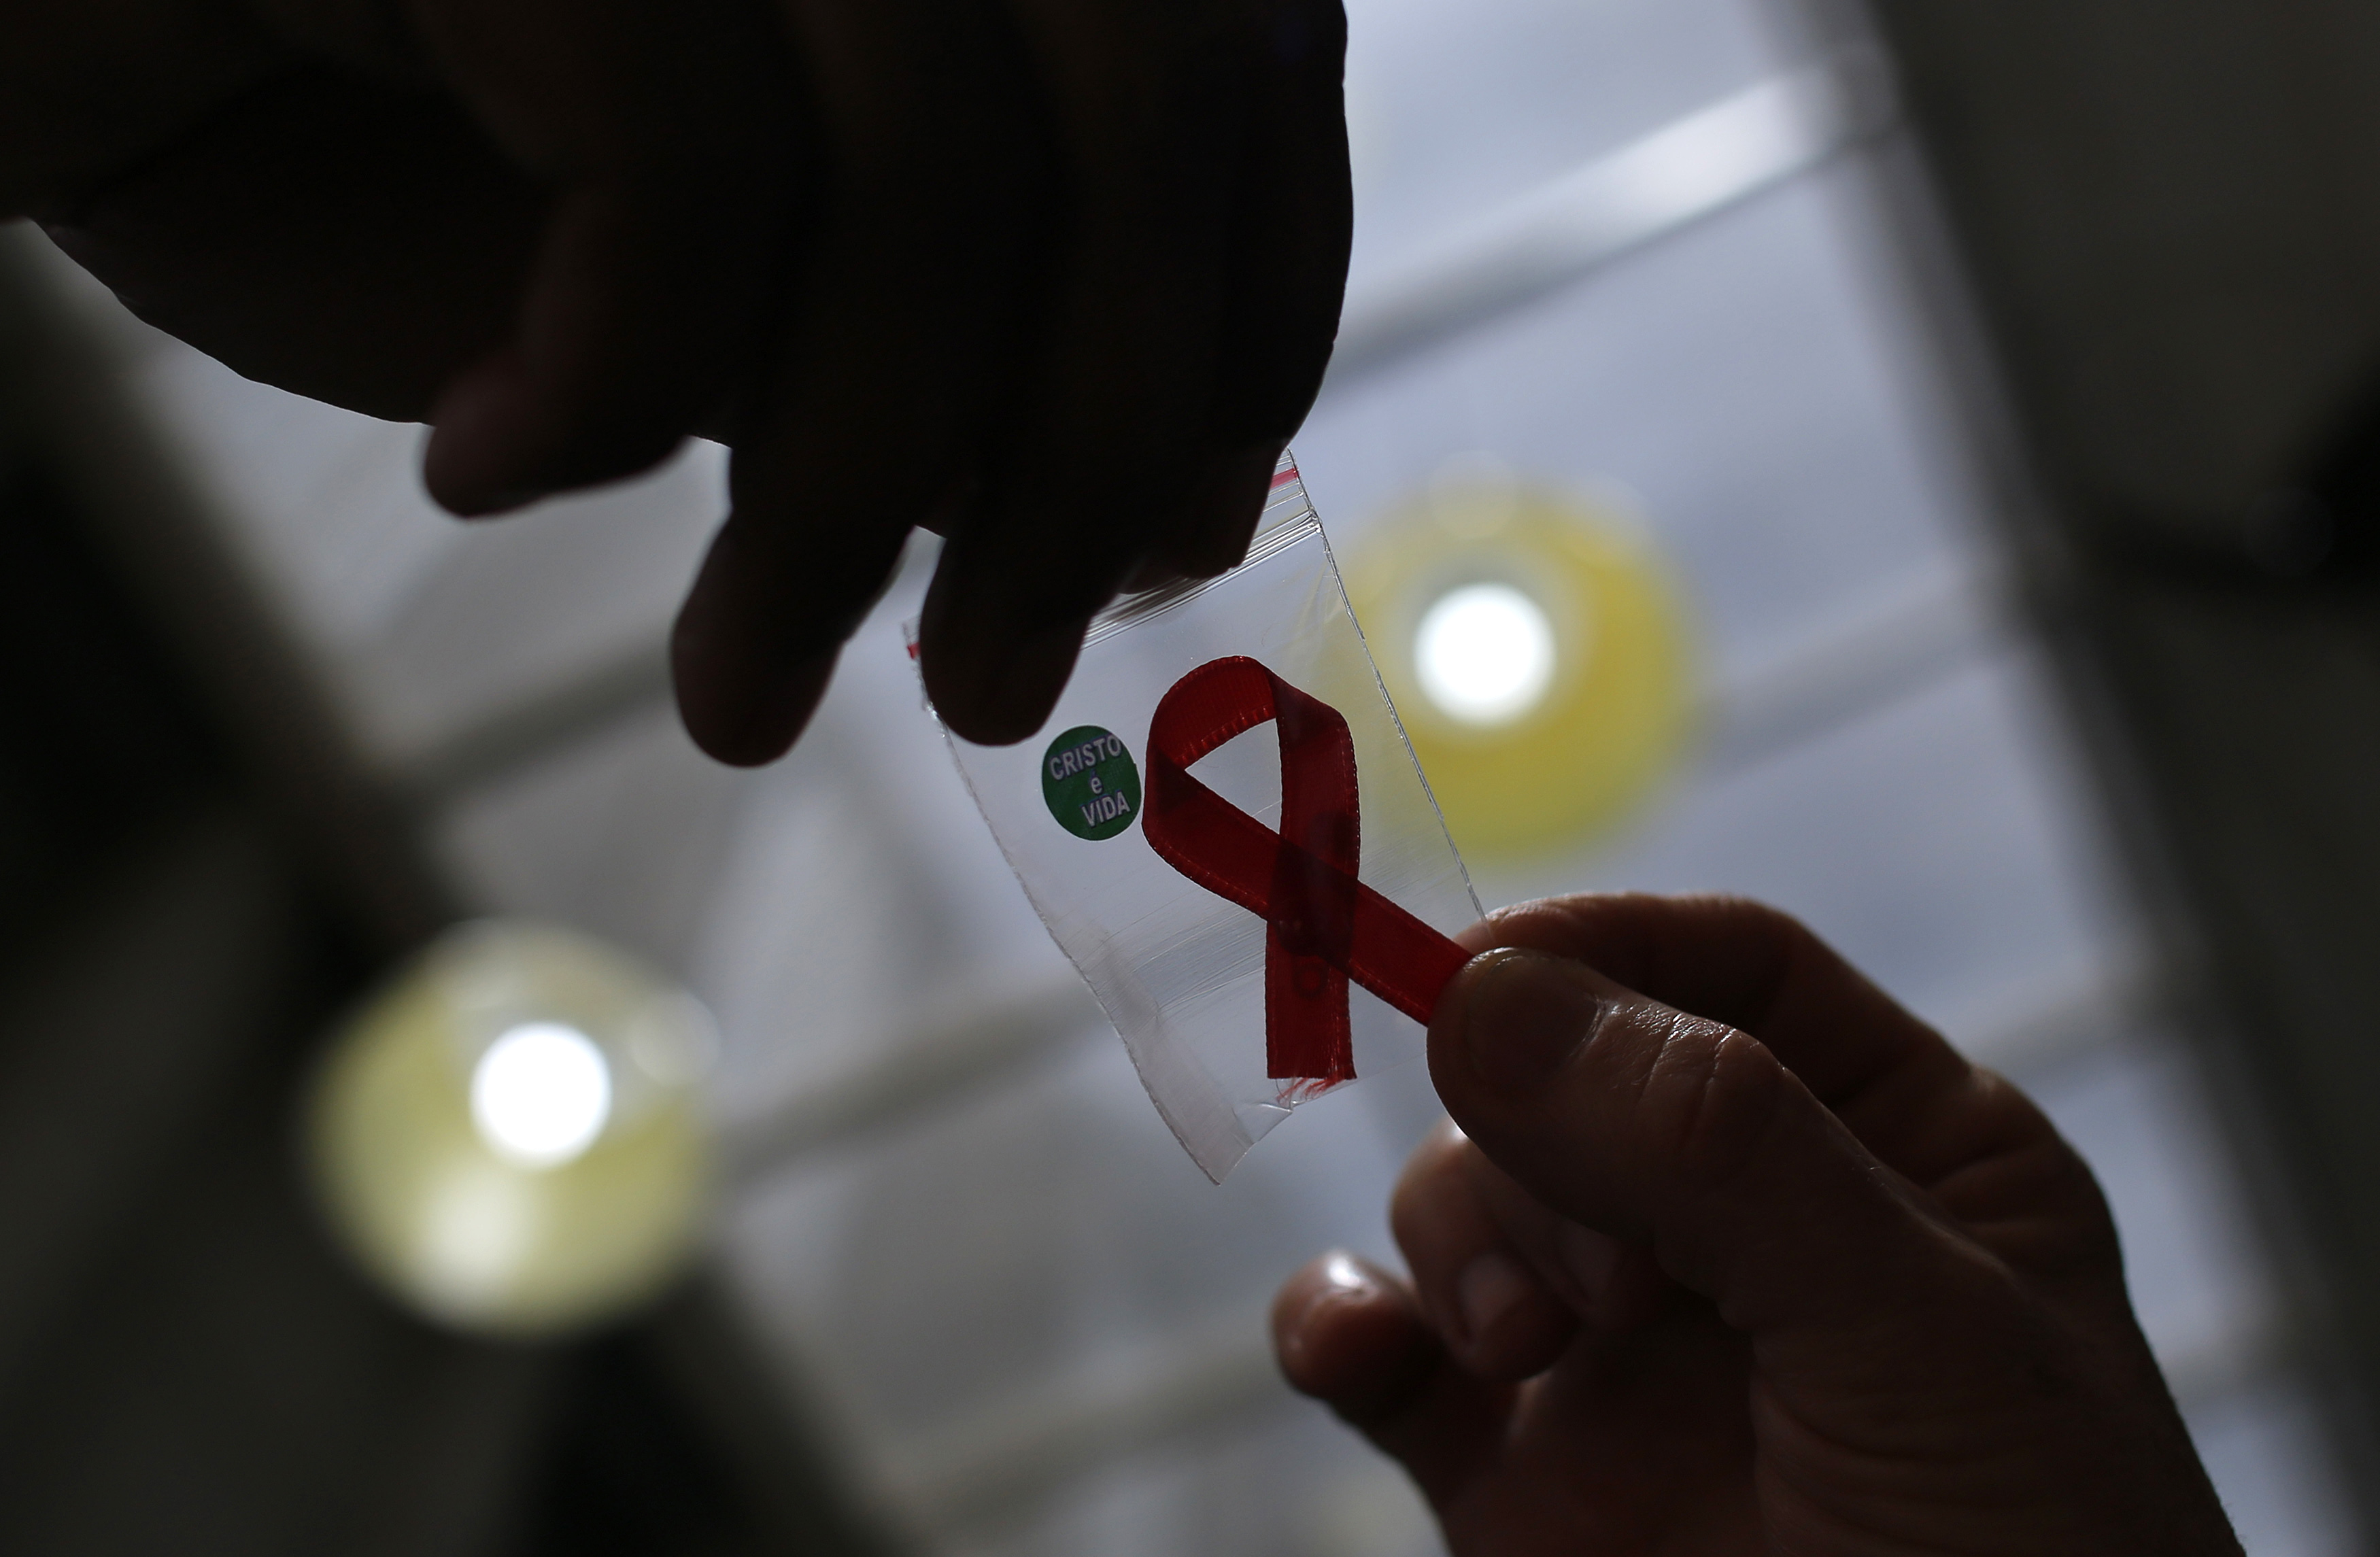 A nurse (L) hands out a red ribbon to a woman, to mark World Aids Day, at the entrance of Emilio Ribas Hospital, in Sao Paulo December 1, 2014. REUTERS/Nacho Doce